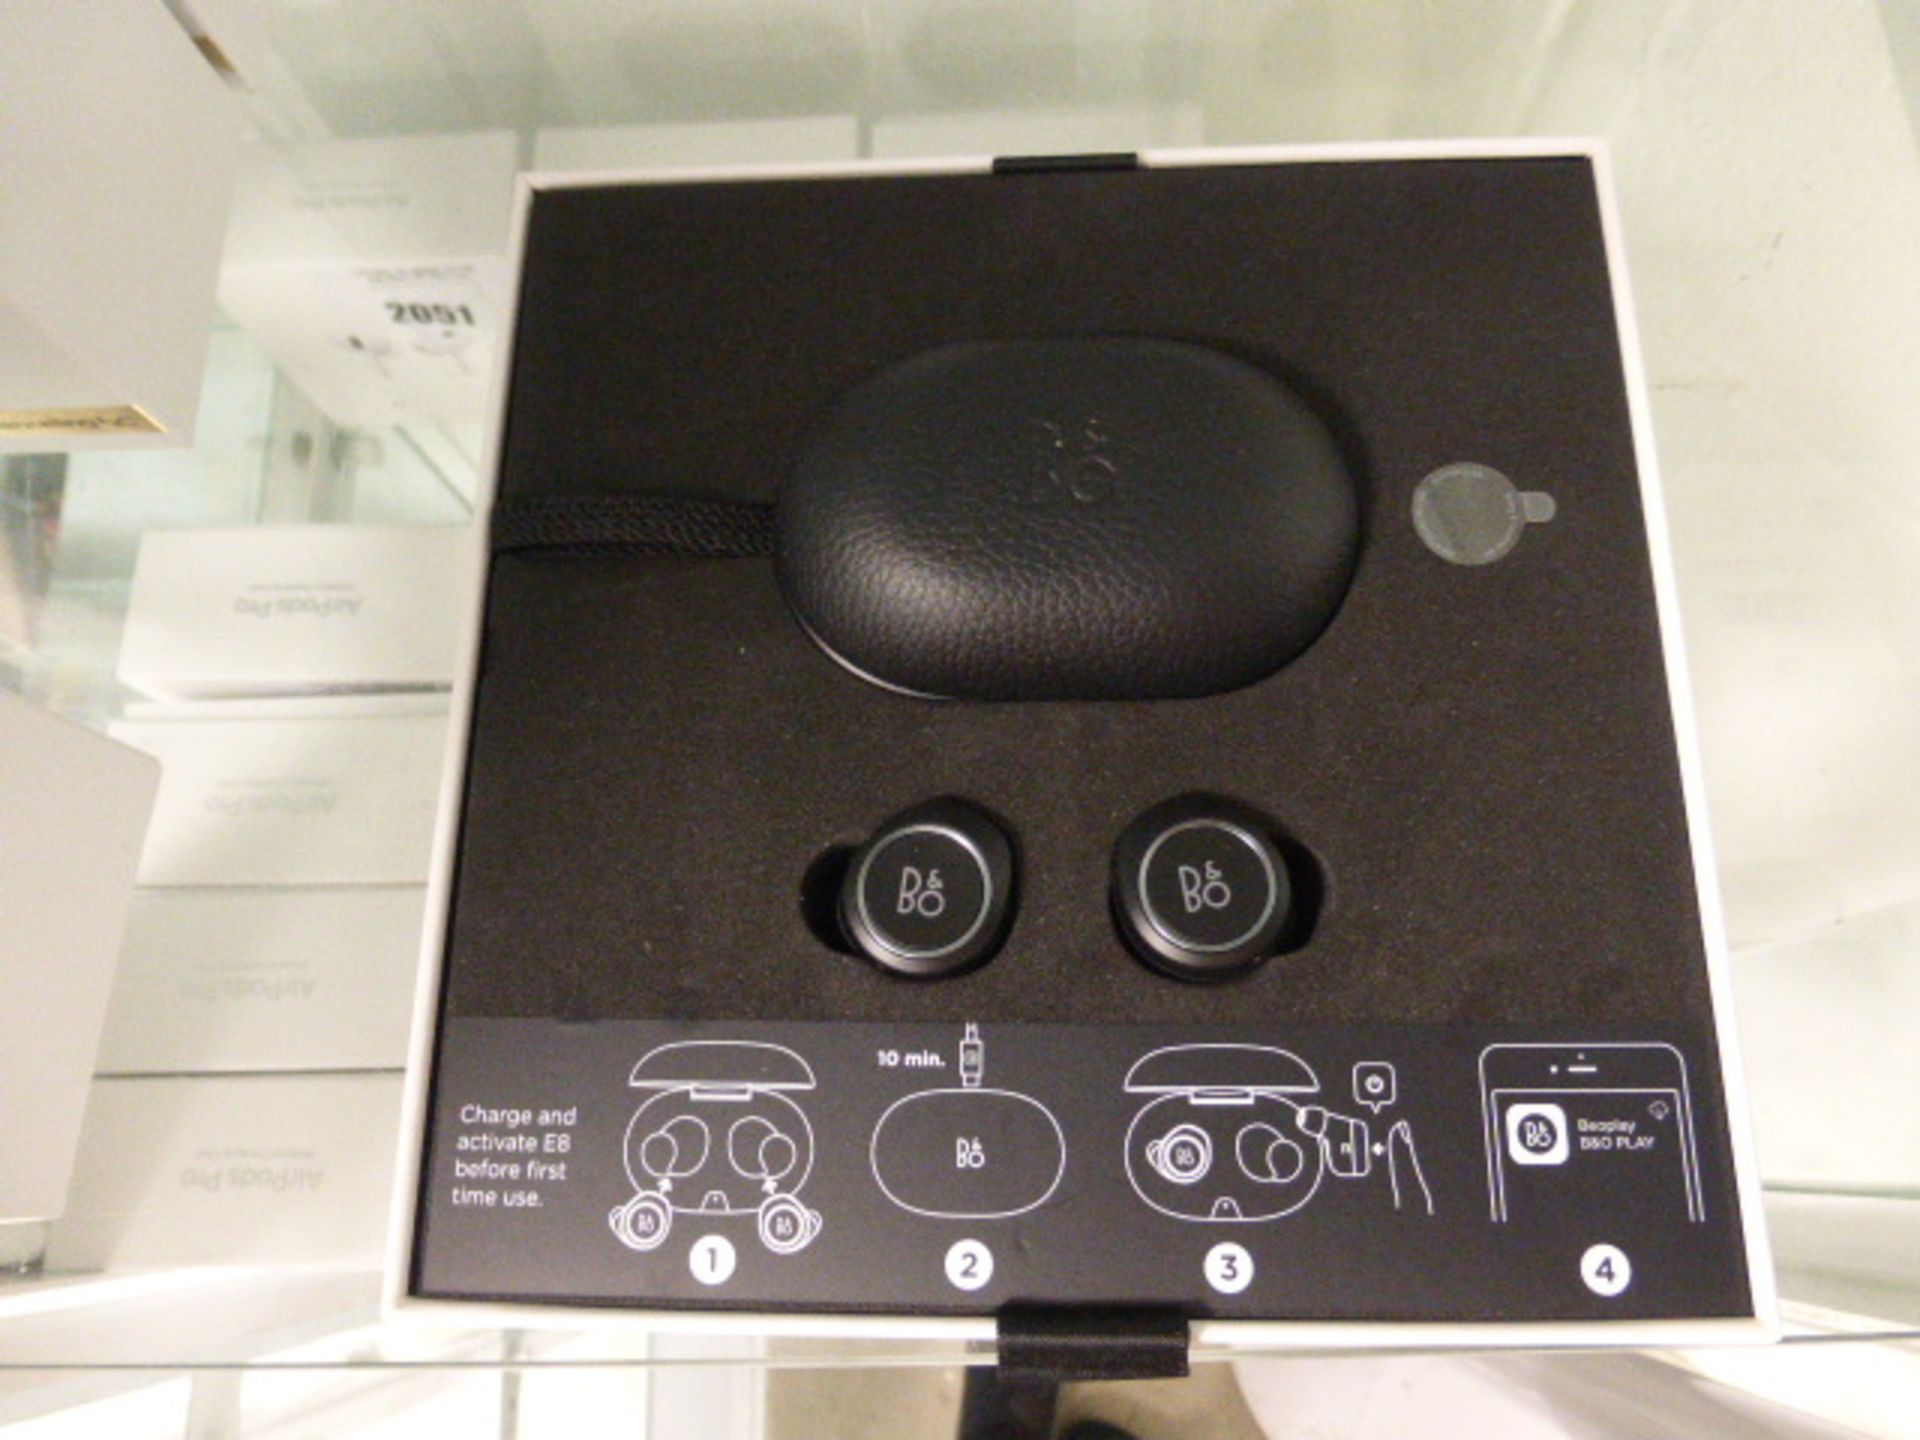 Set of Bang & Olufsen E8 wireless earphones with charging case and box